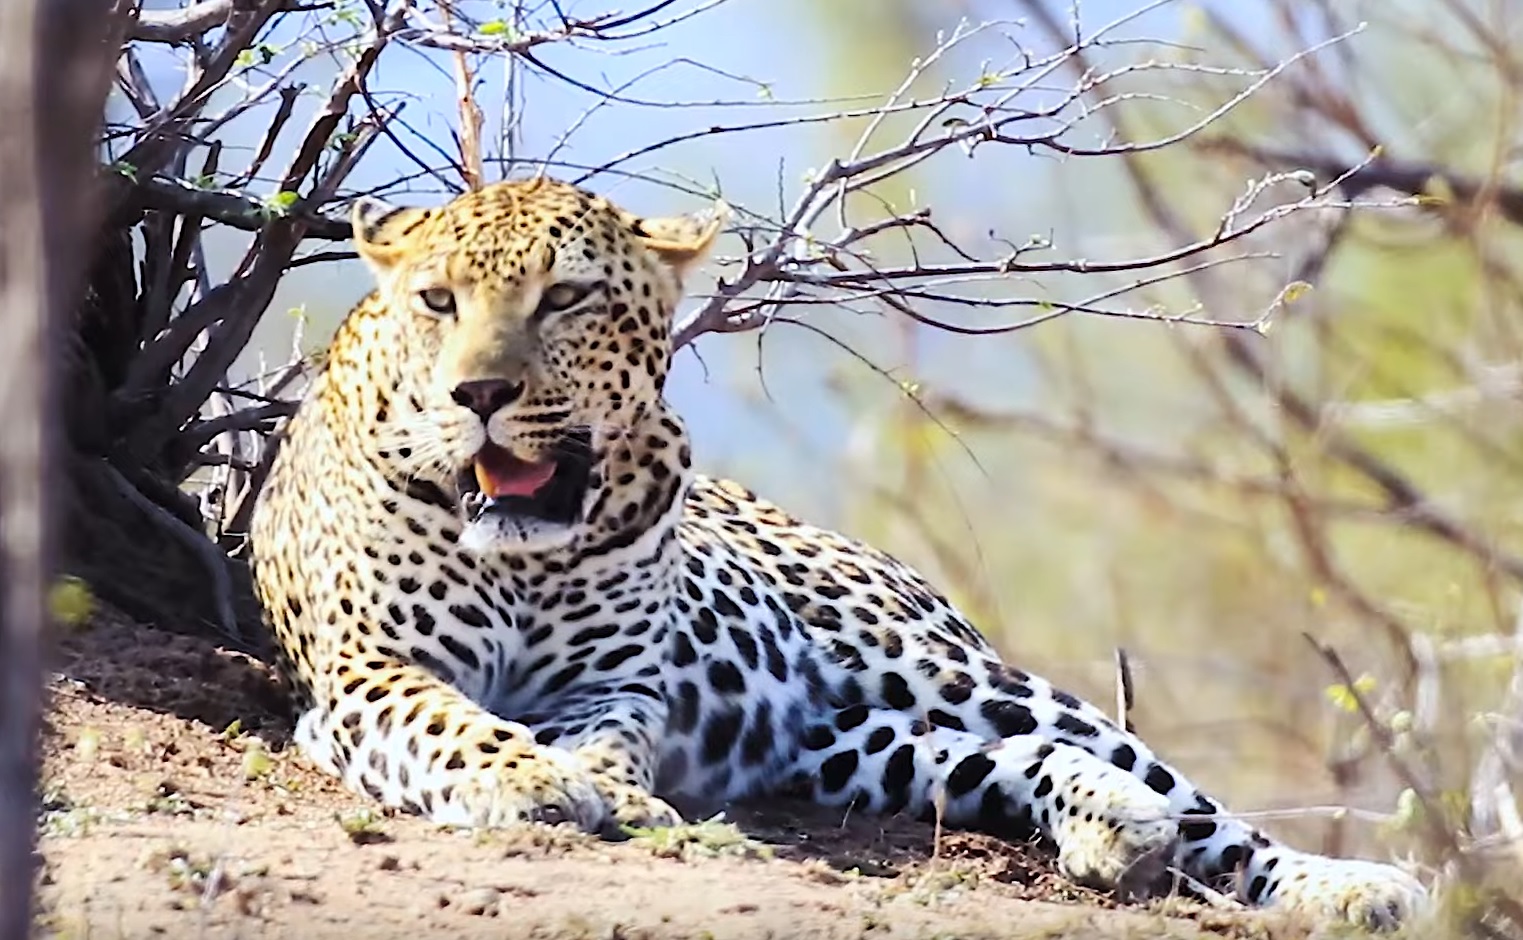 Maximus - One Of The Biggest Leopard In Kruger